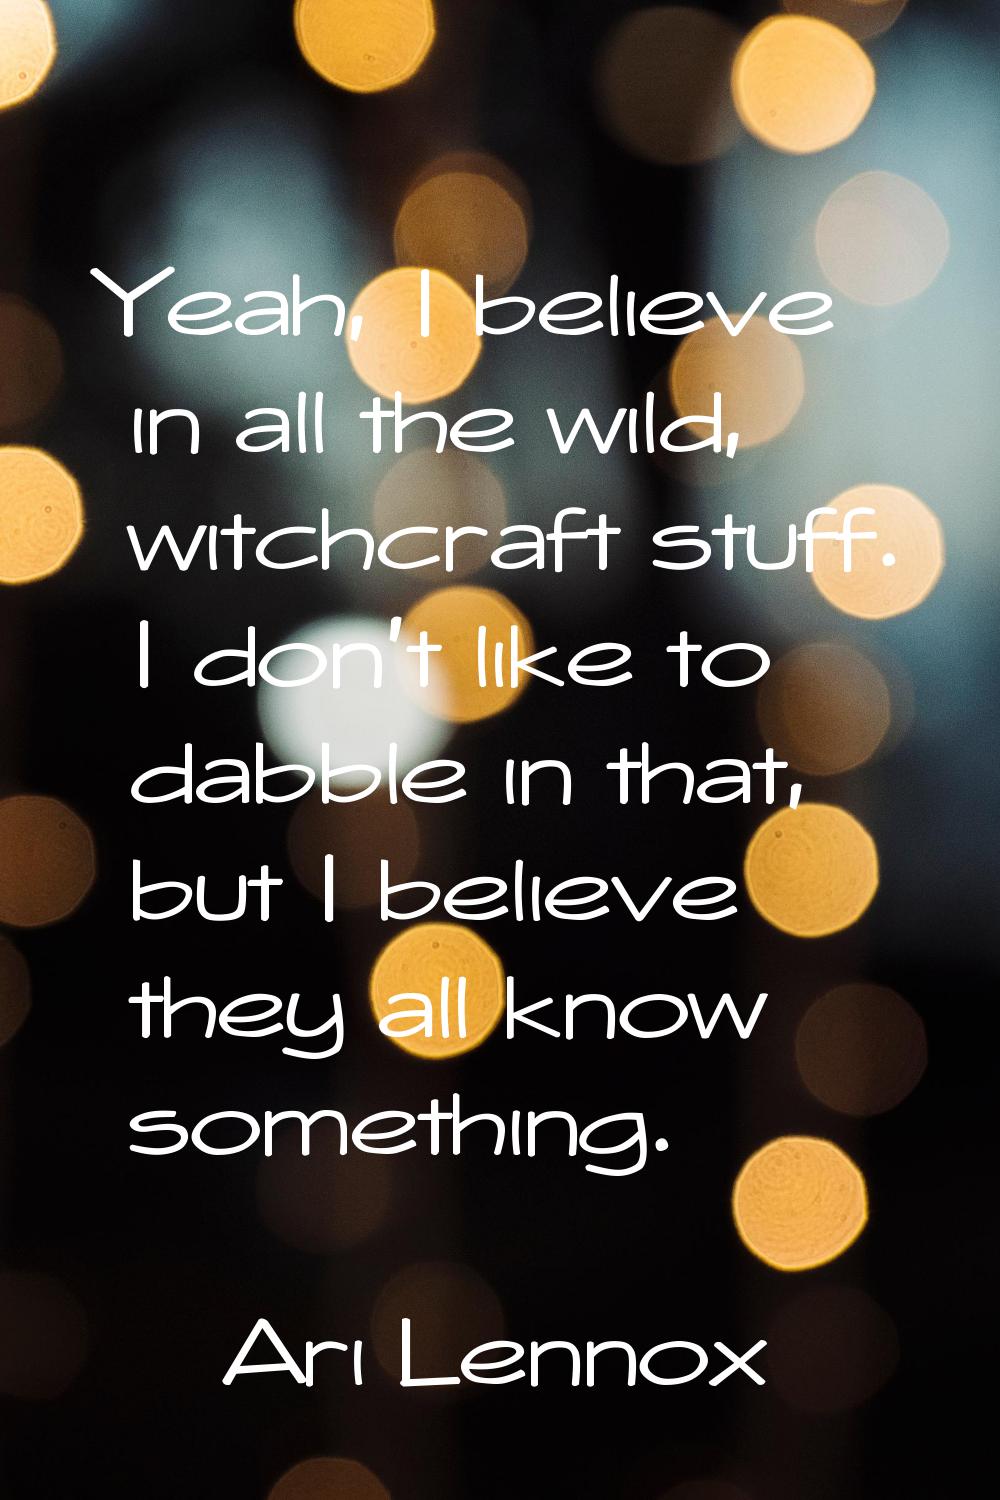 Yeah, I believe in all the wild, witchcraft stuff. I don't like to dabble in that, but I believe th